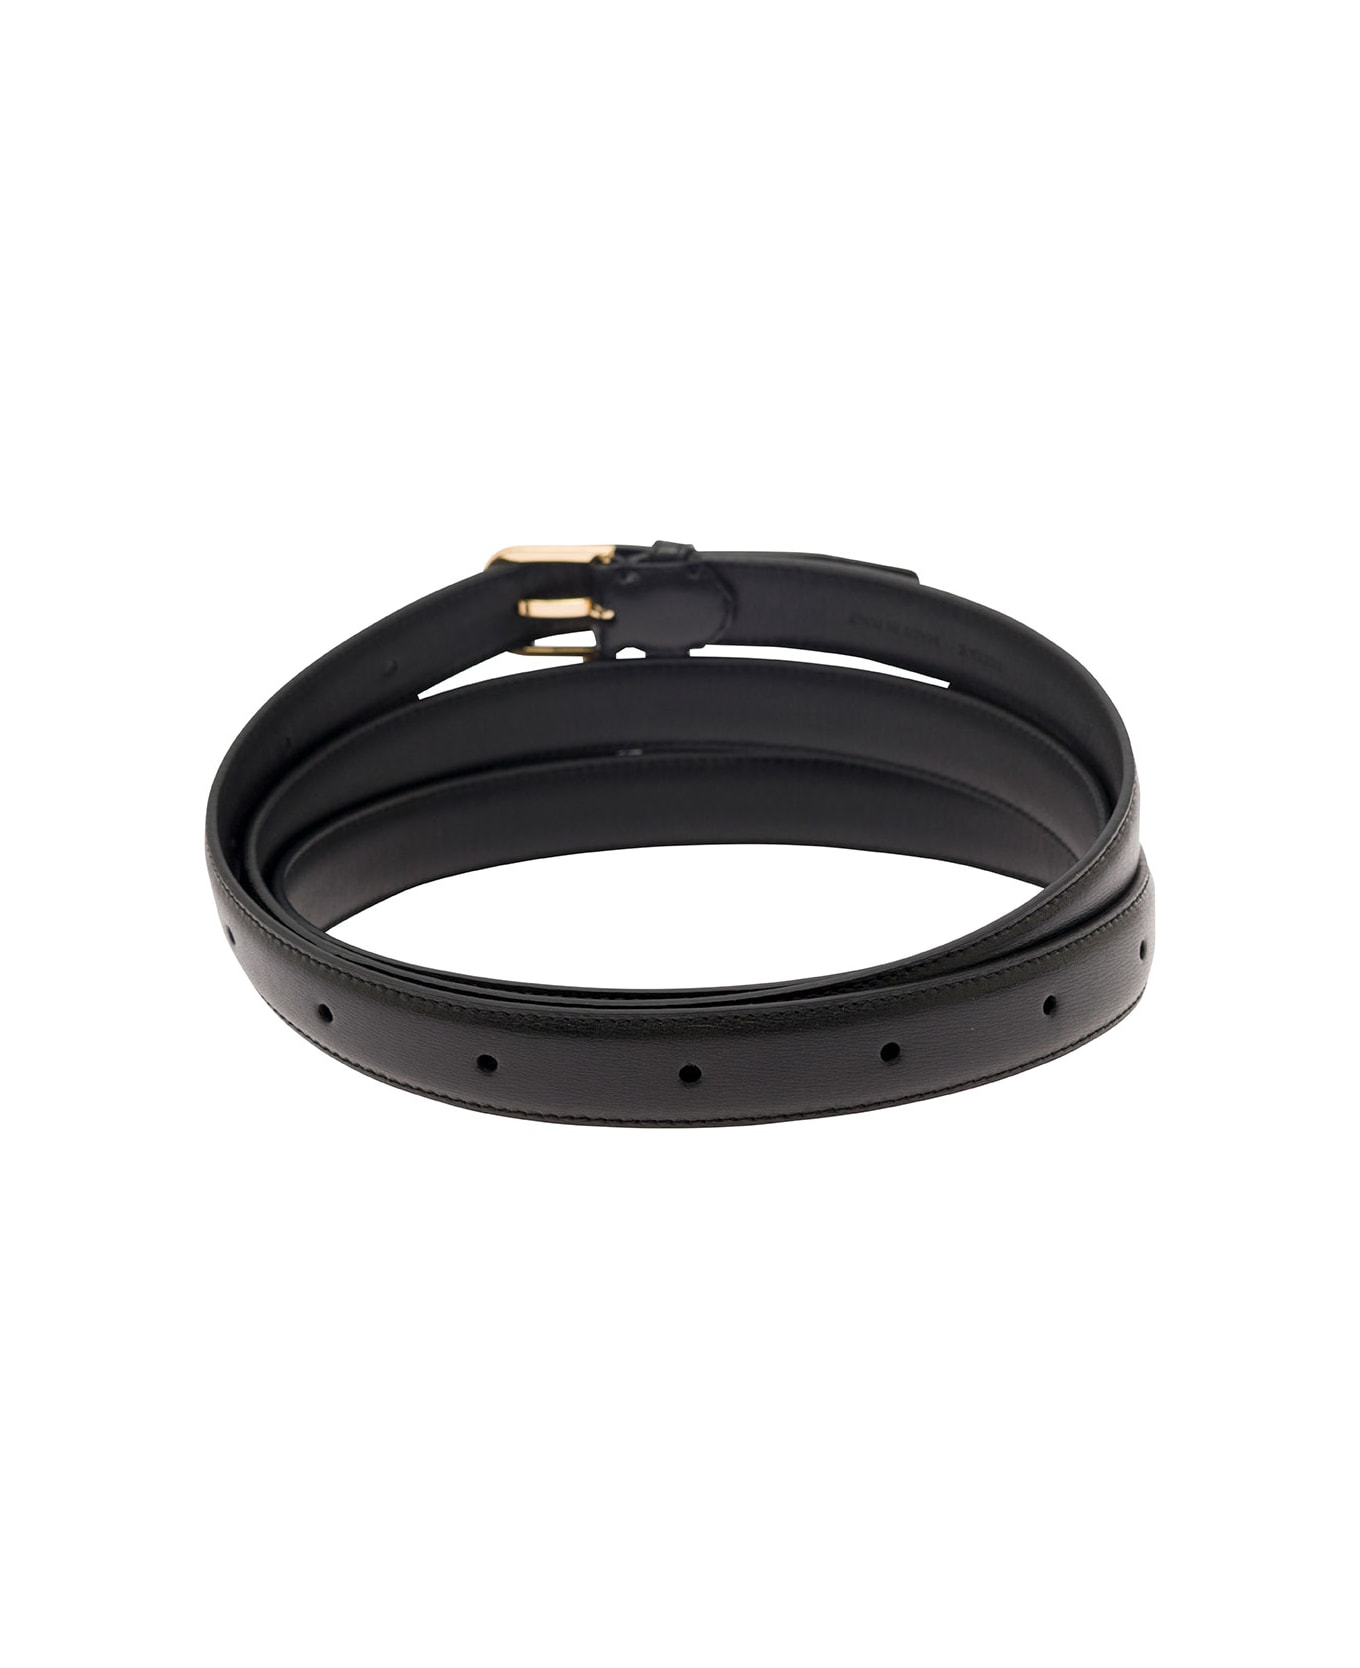 Totême Black Wrap Belt With Gold Tone Buckle In Leather Woman - Black